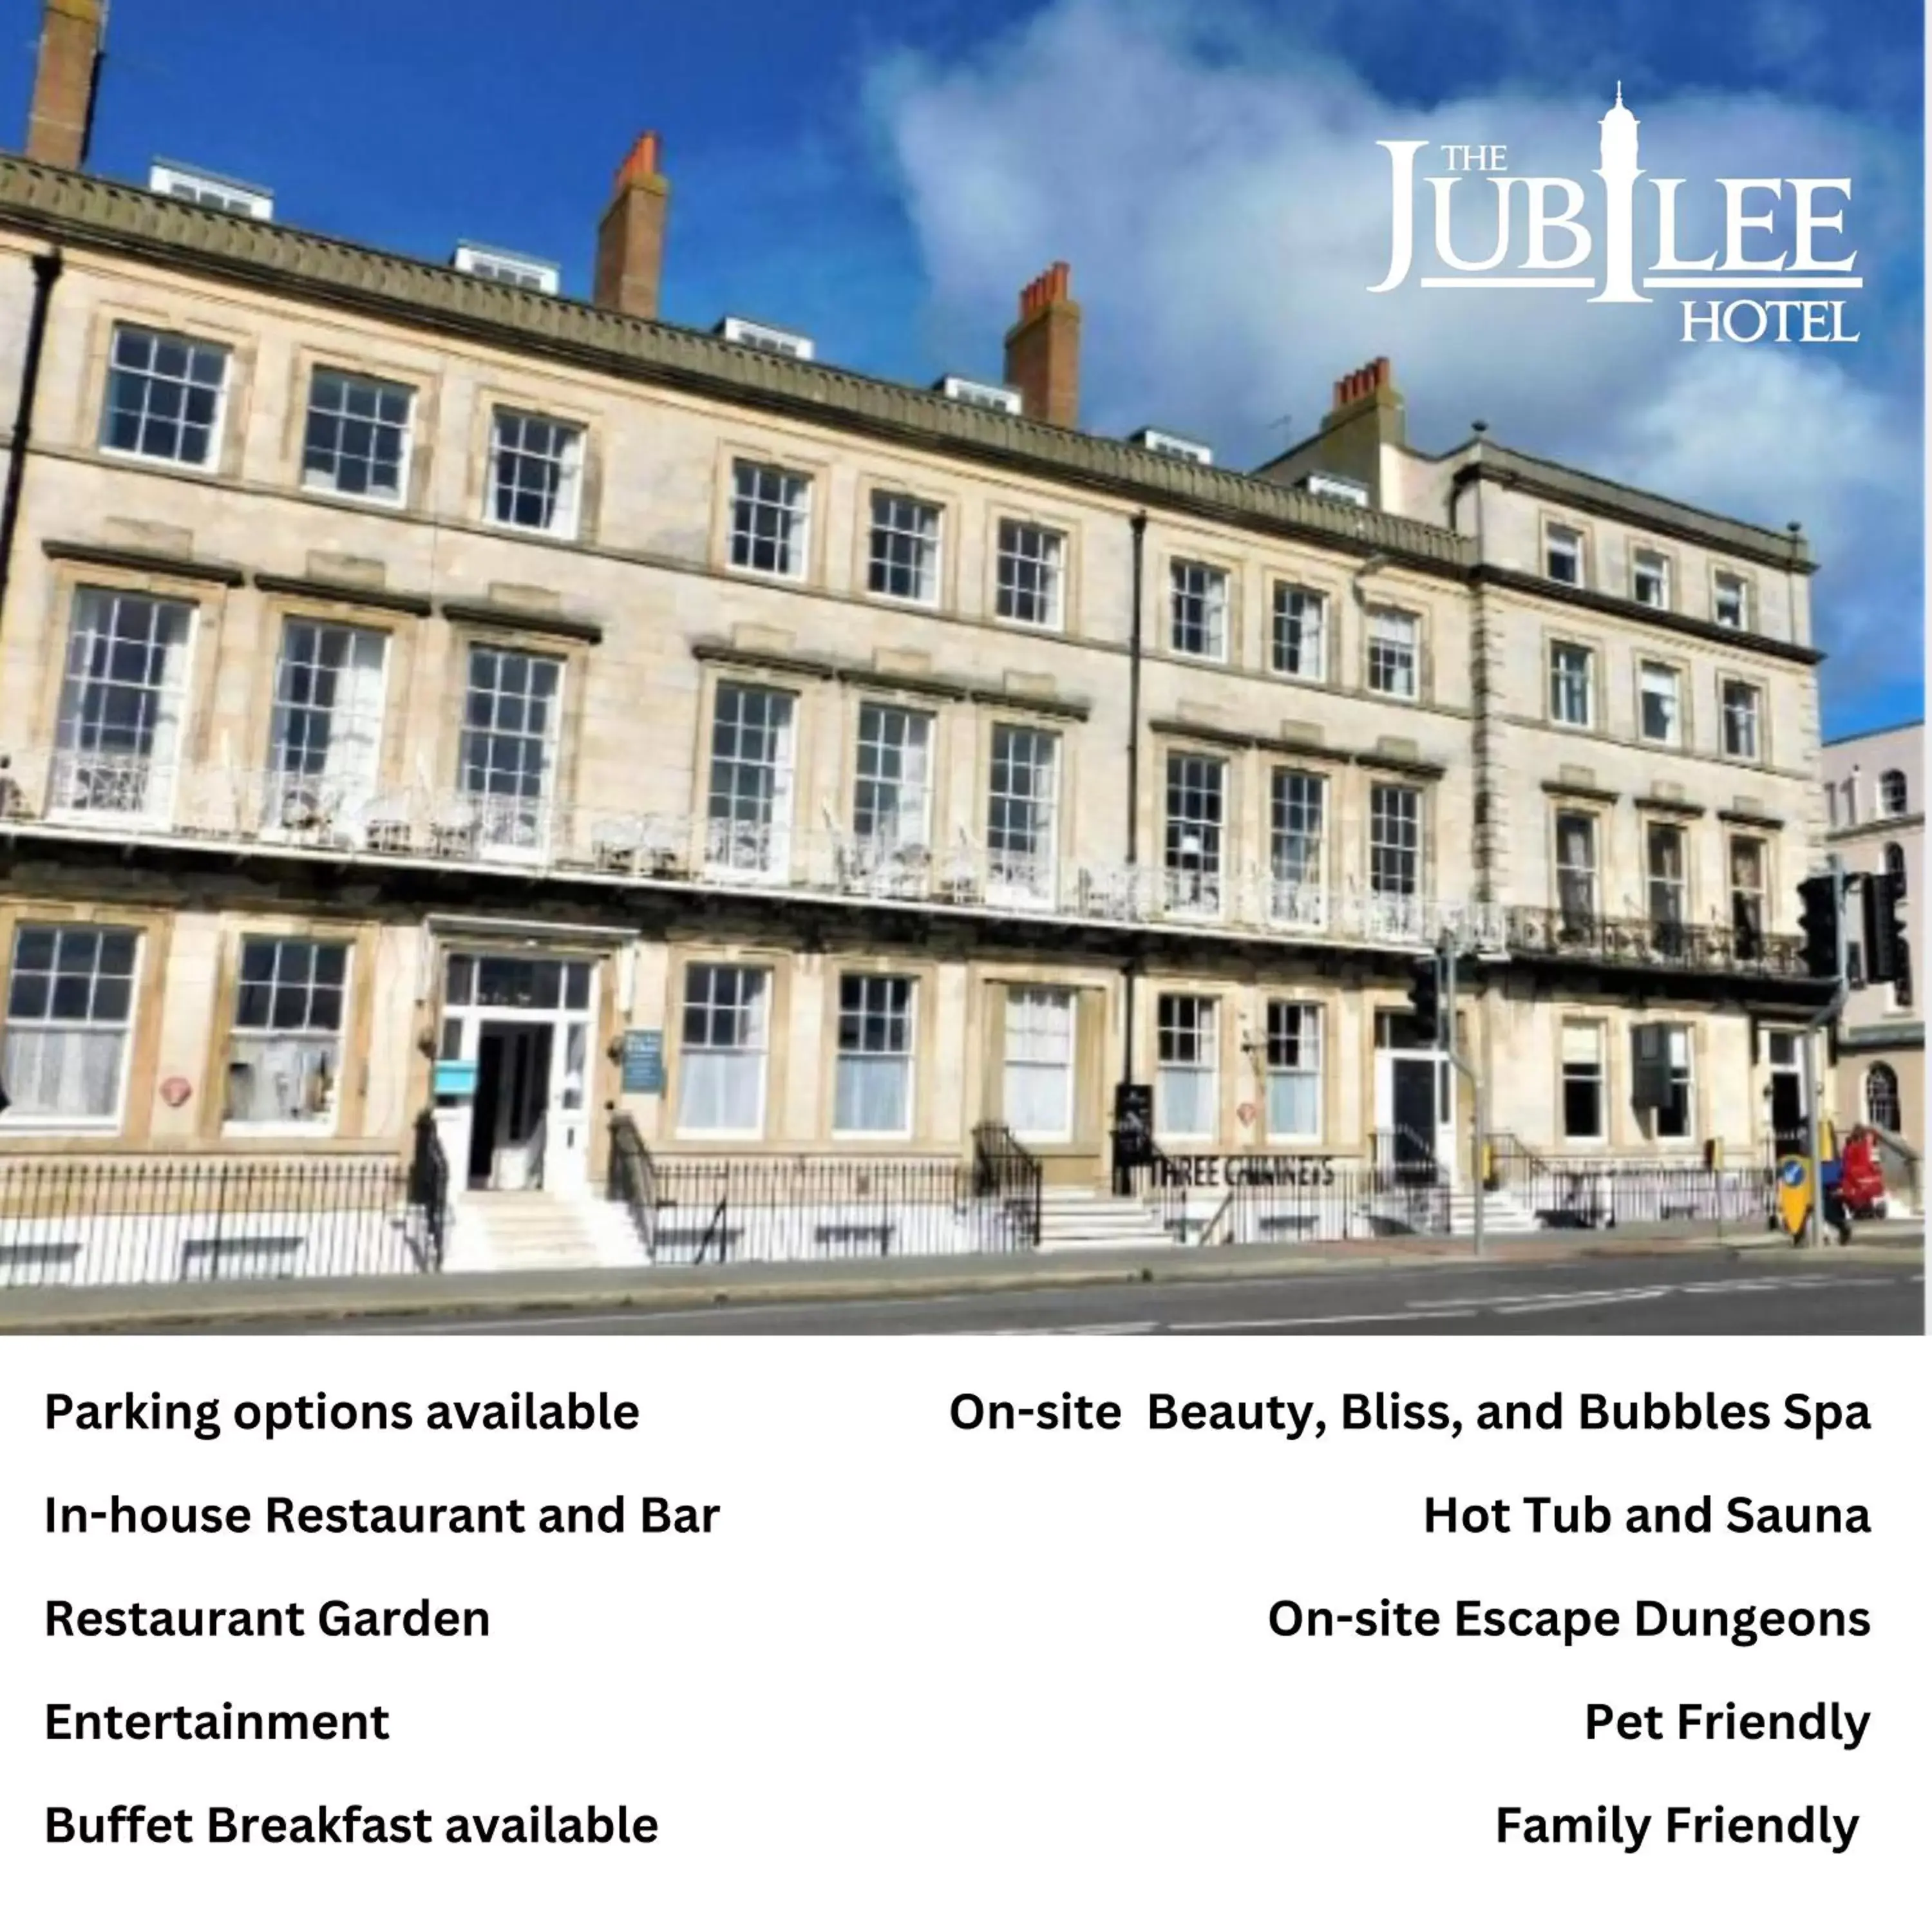 Property Building in The Jubilee Hotel - with Spa and Restaurant and Entertainment